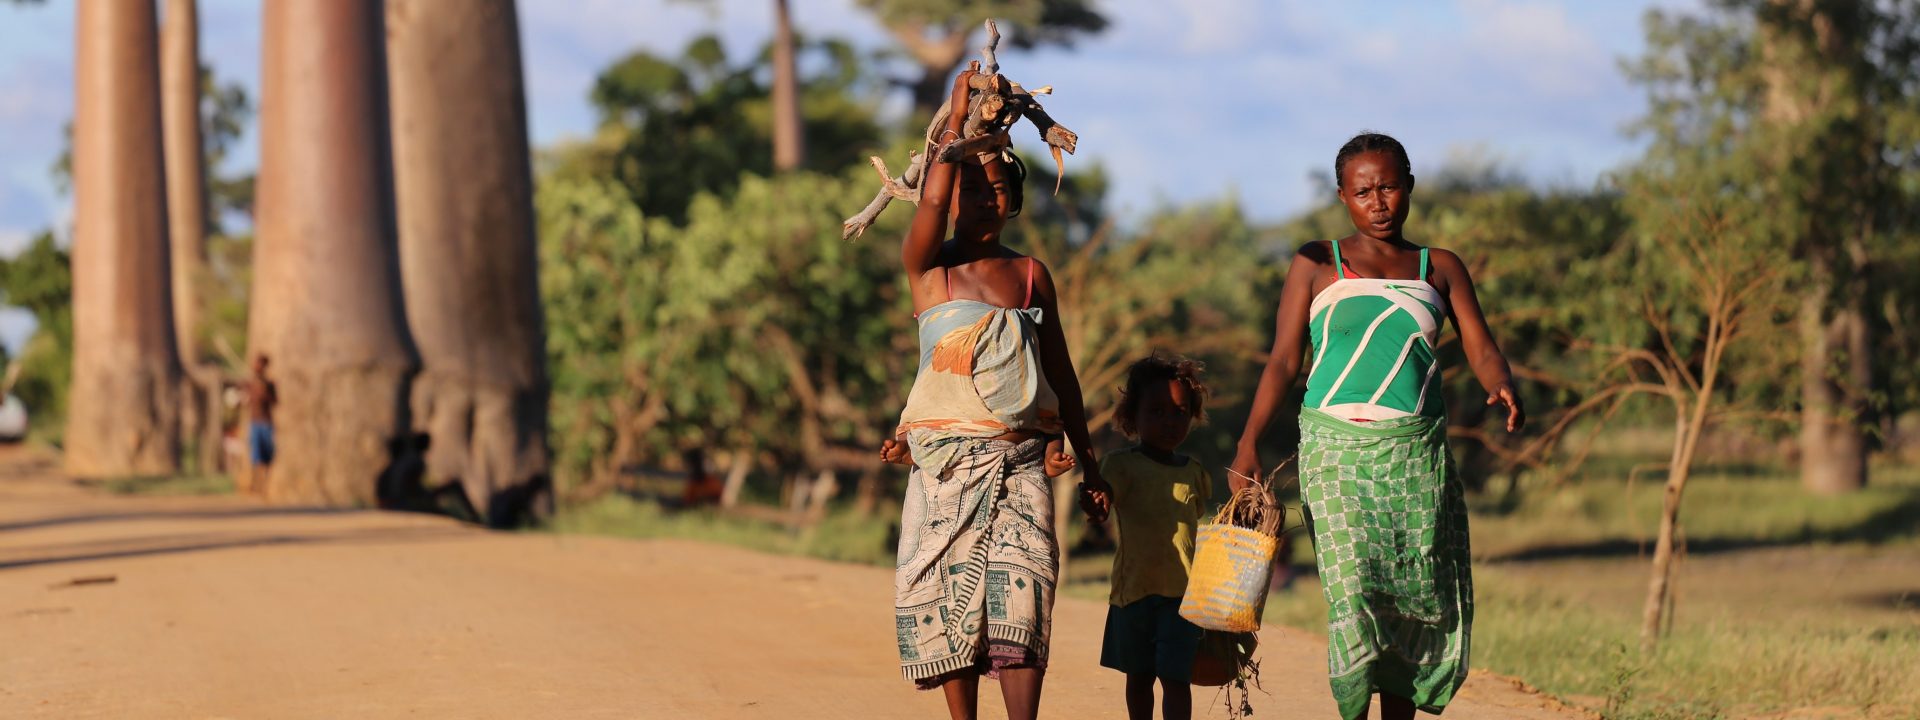 Madagascar: when “red wind” means hunger